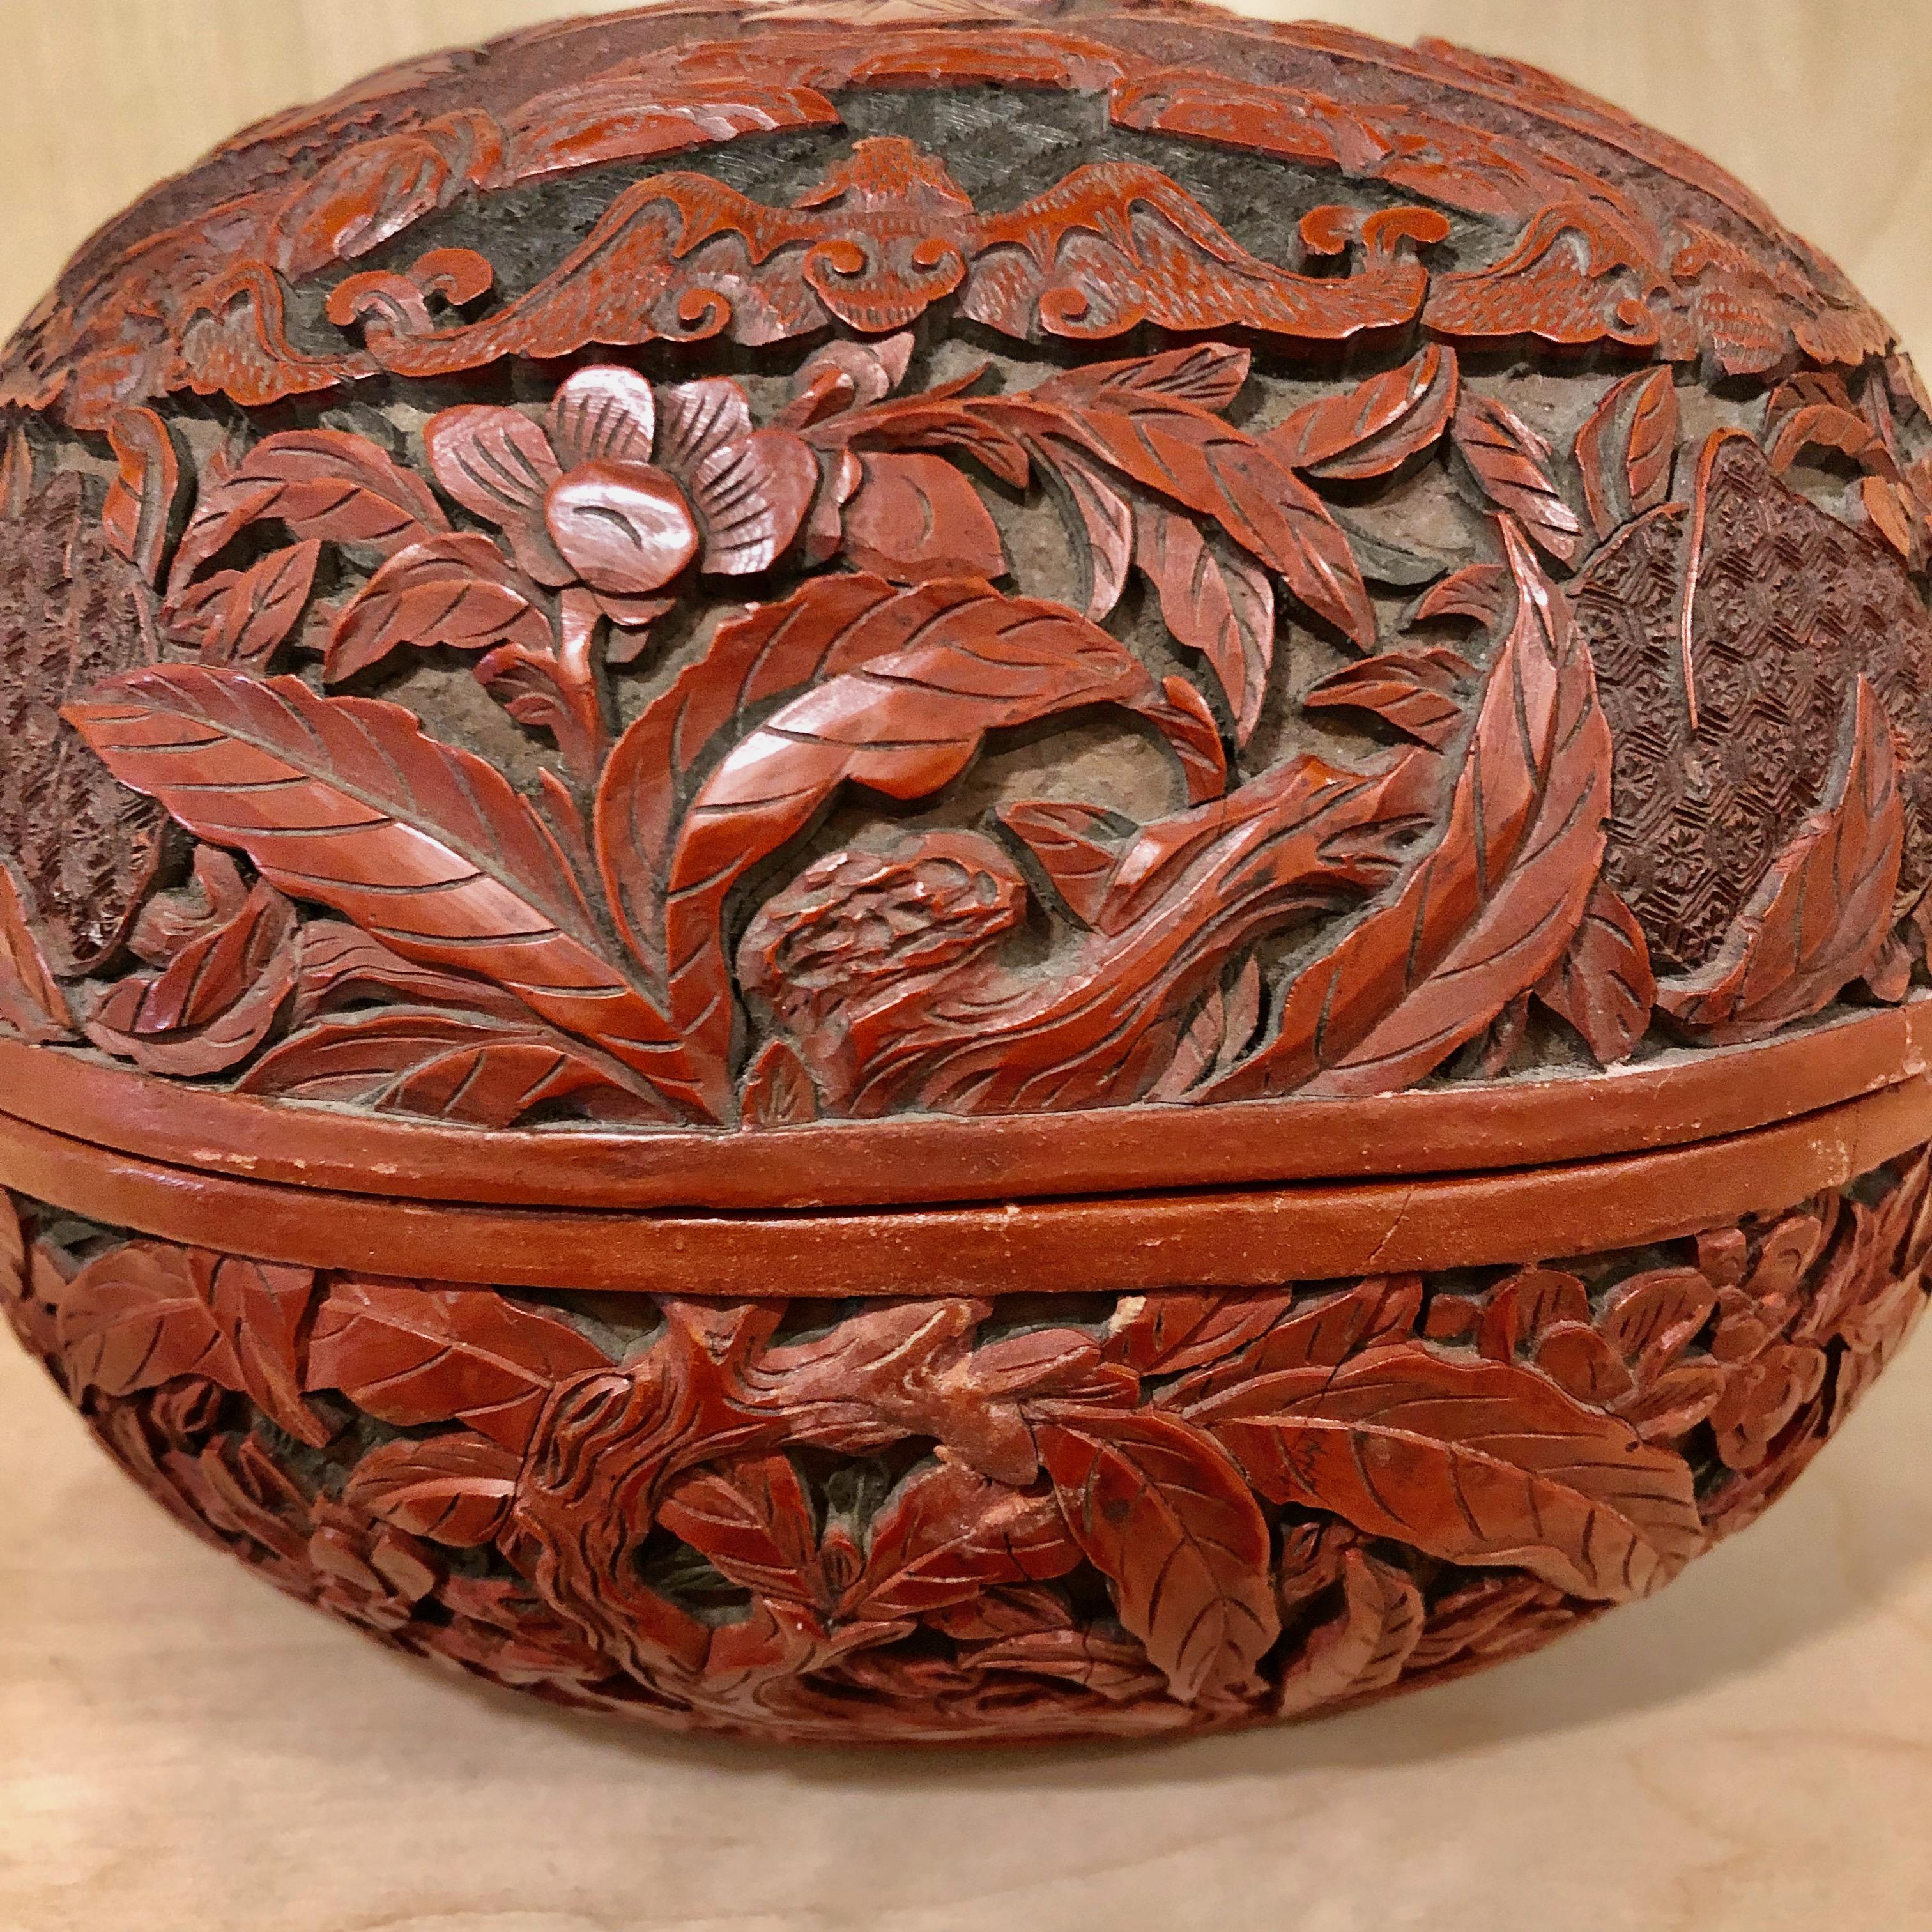 Lacquer Chinese Cinnabar Finely Carved Box and Cover, Late 18th-Early 19th Century For Sale